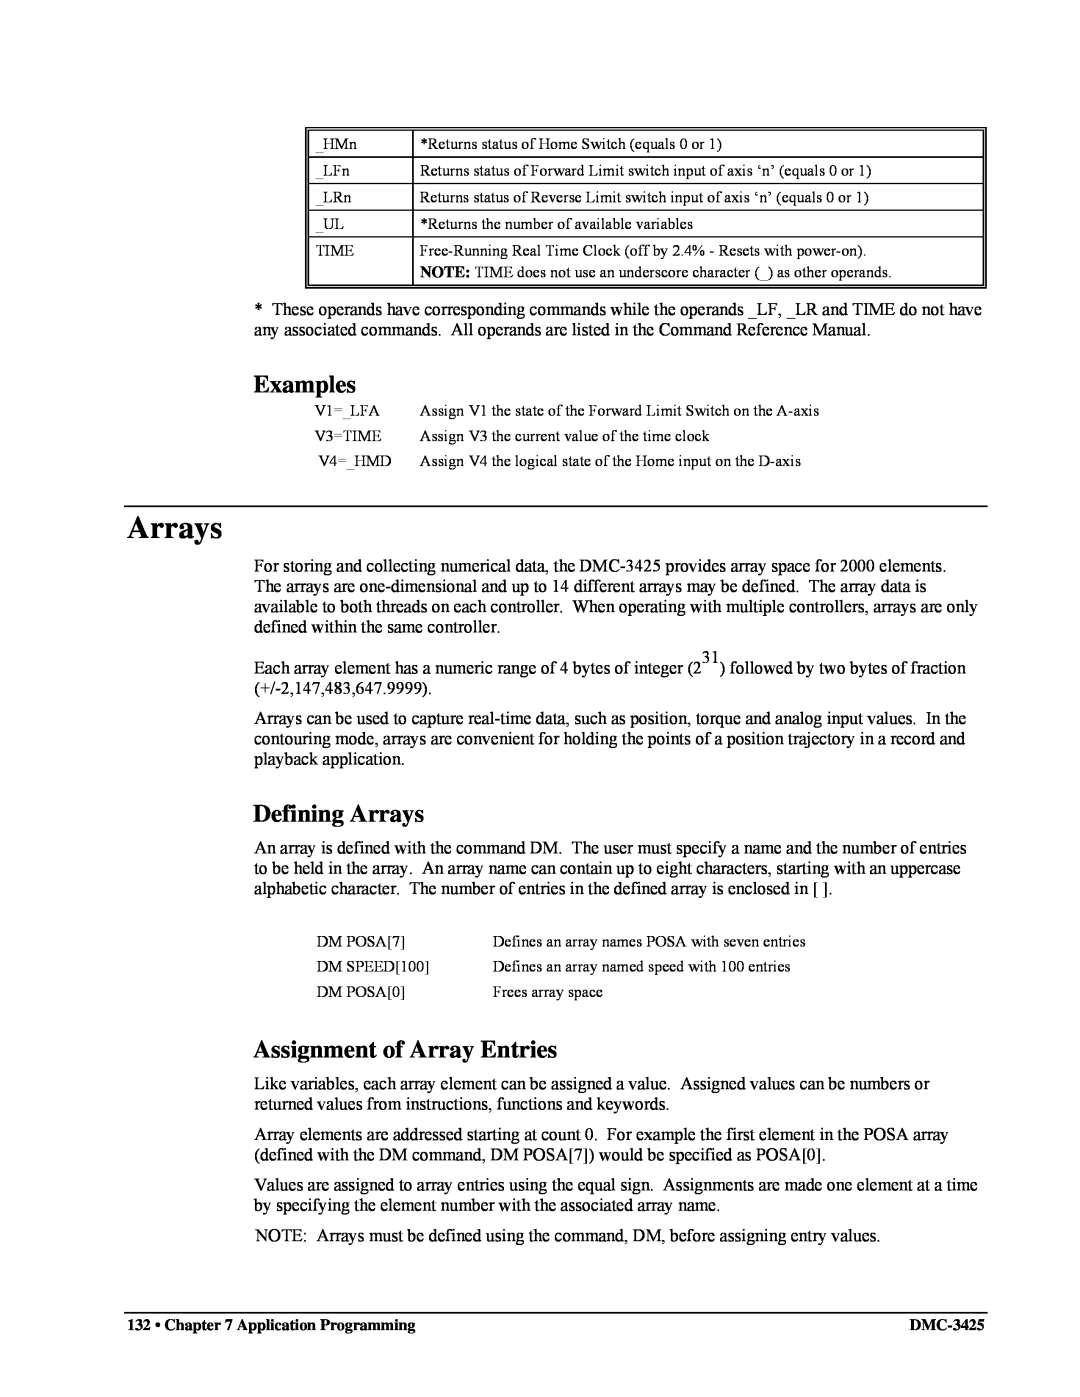 Galil DMC-3425 user manual Defining Arrays, Assignment of Array Entries, Examples 